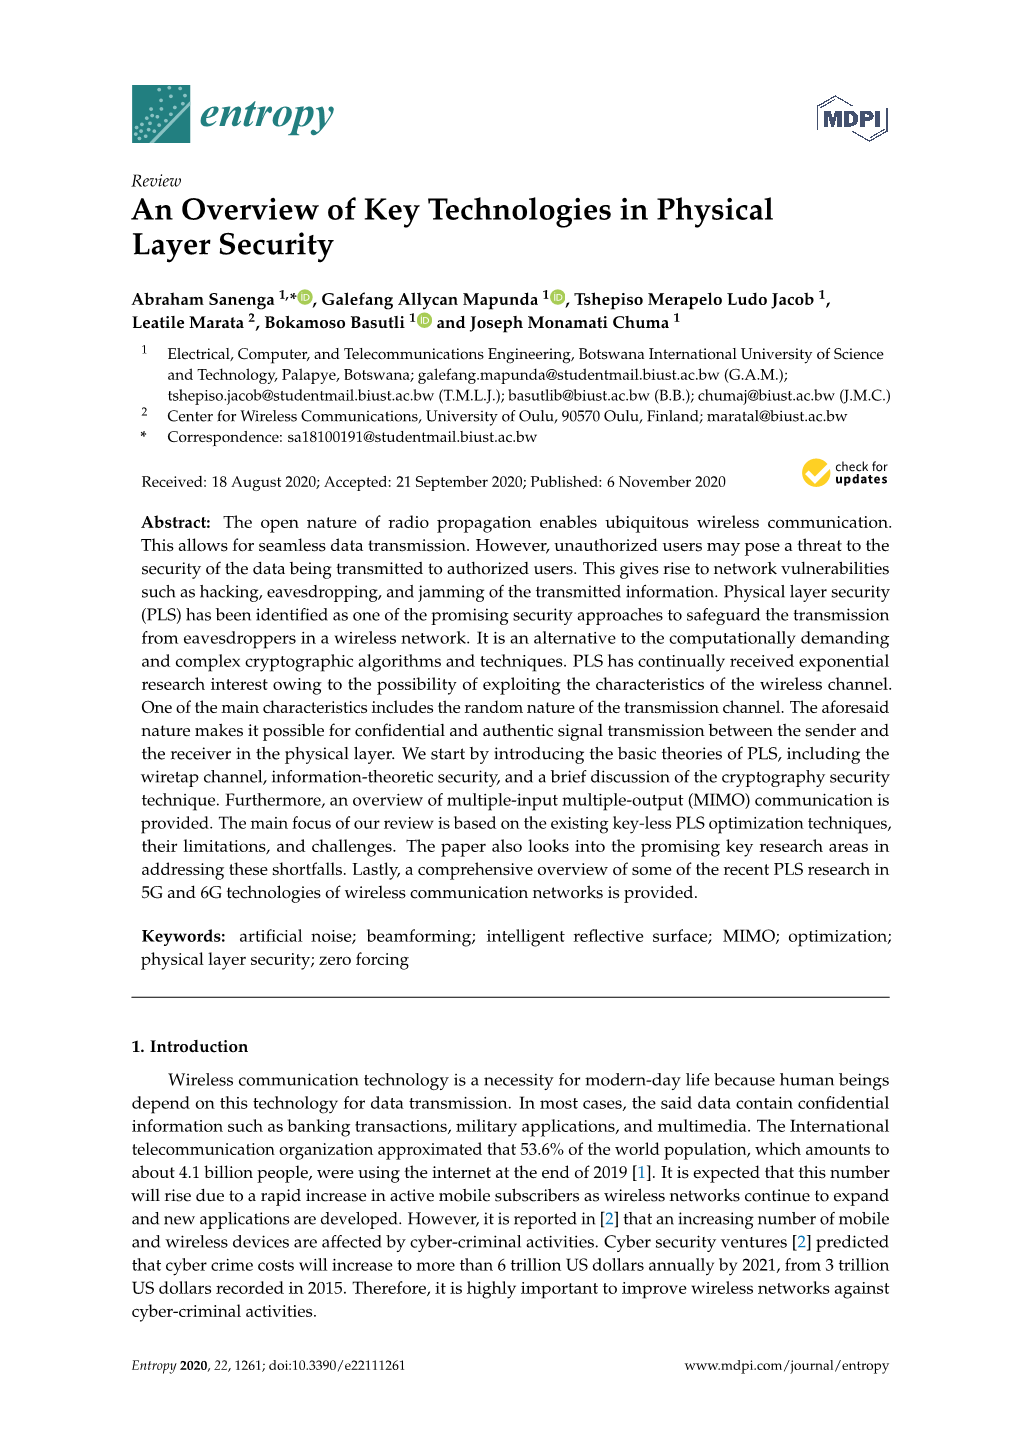 An Overview of Key Technologies in Physical Layer Security